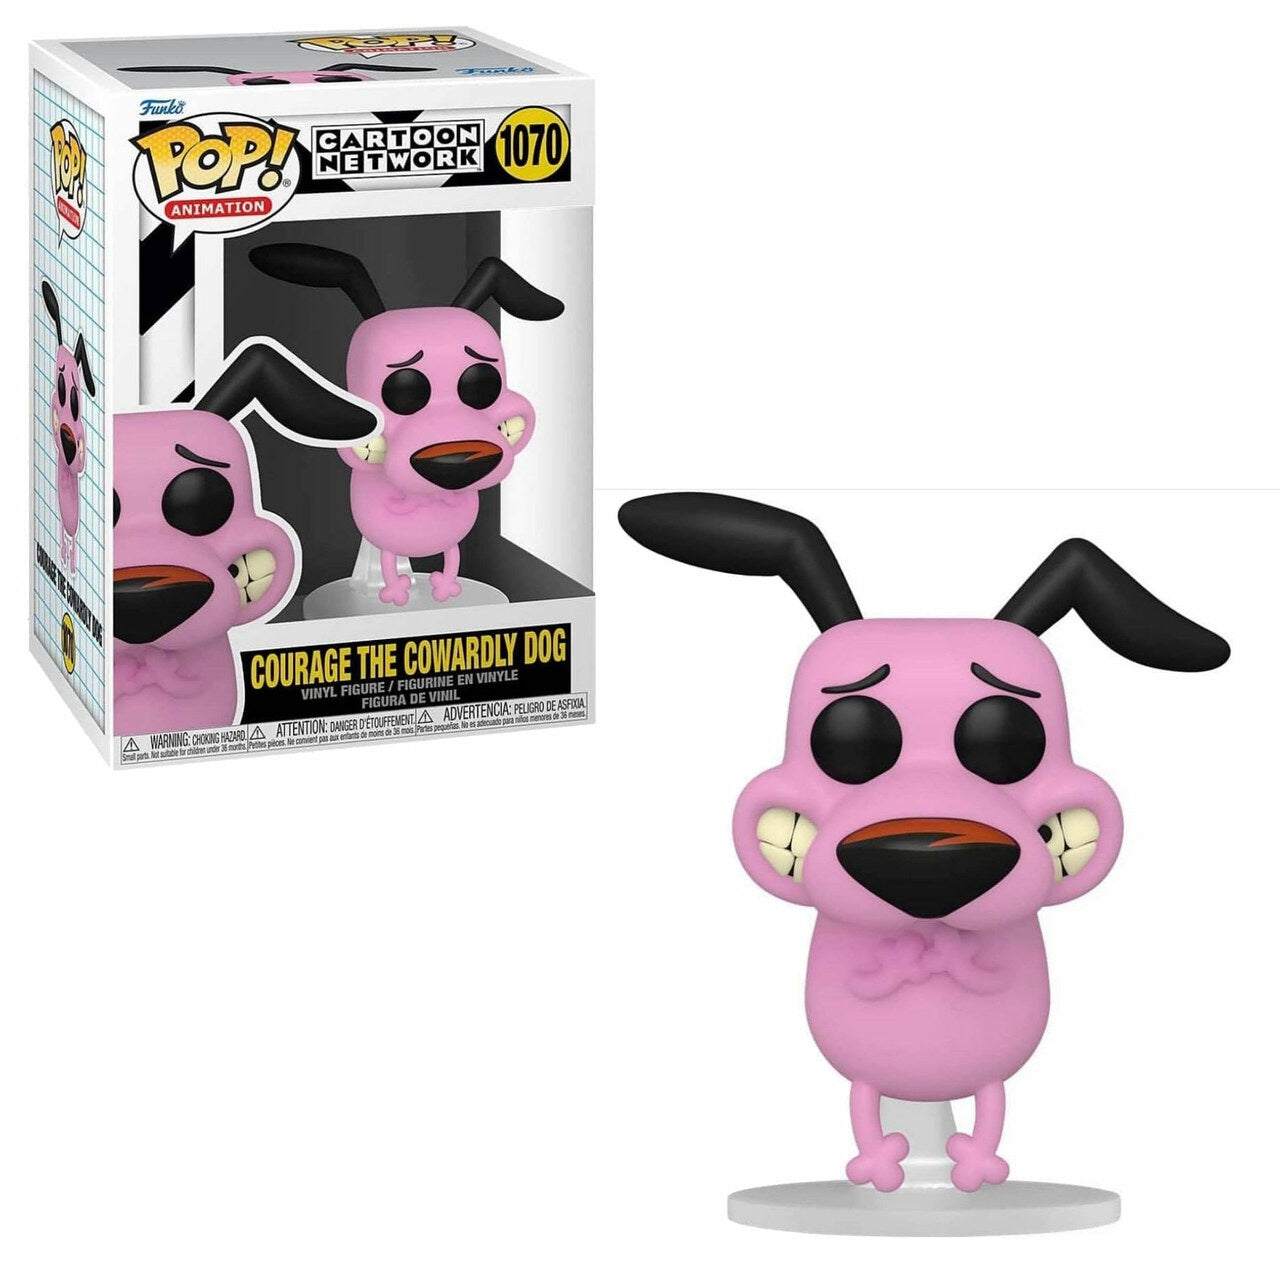 Courage the Cowardly Dog Funko Pop